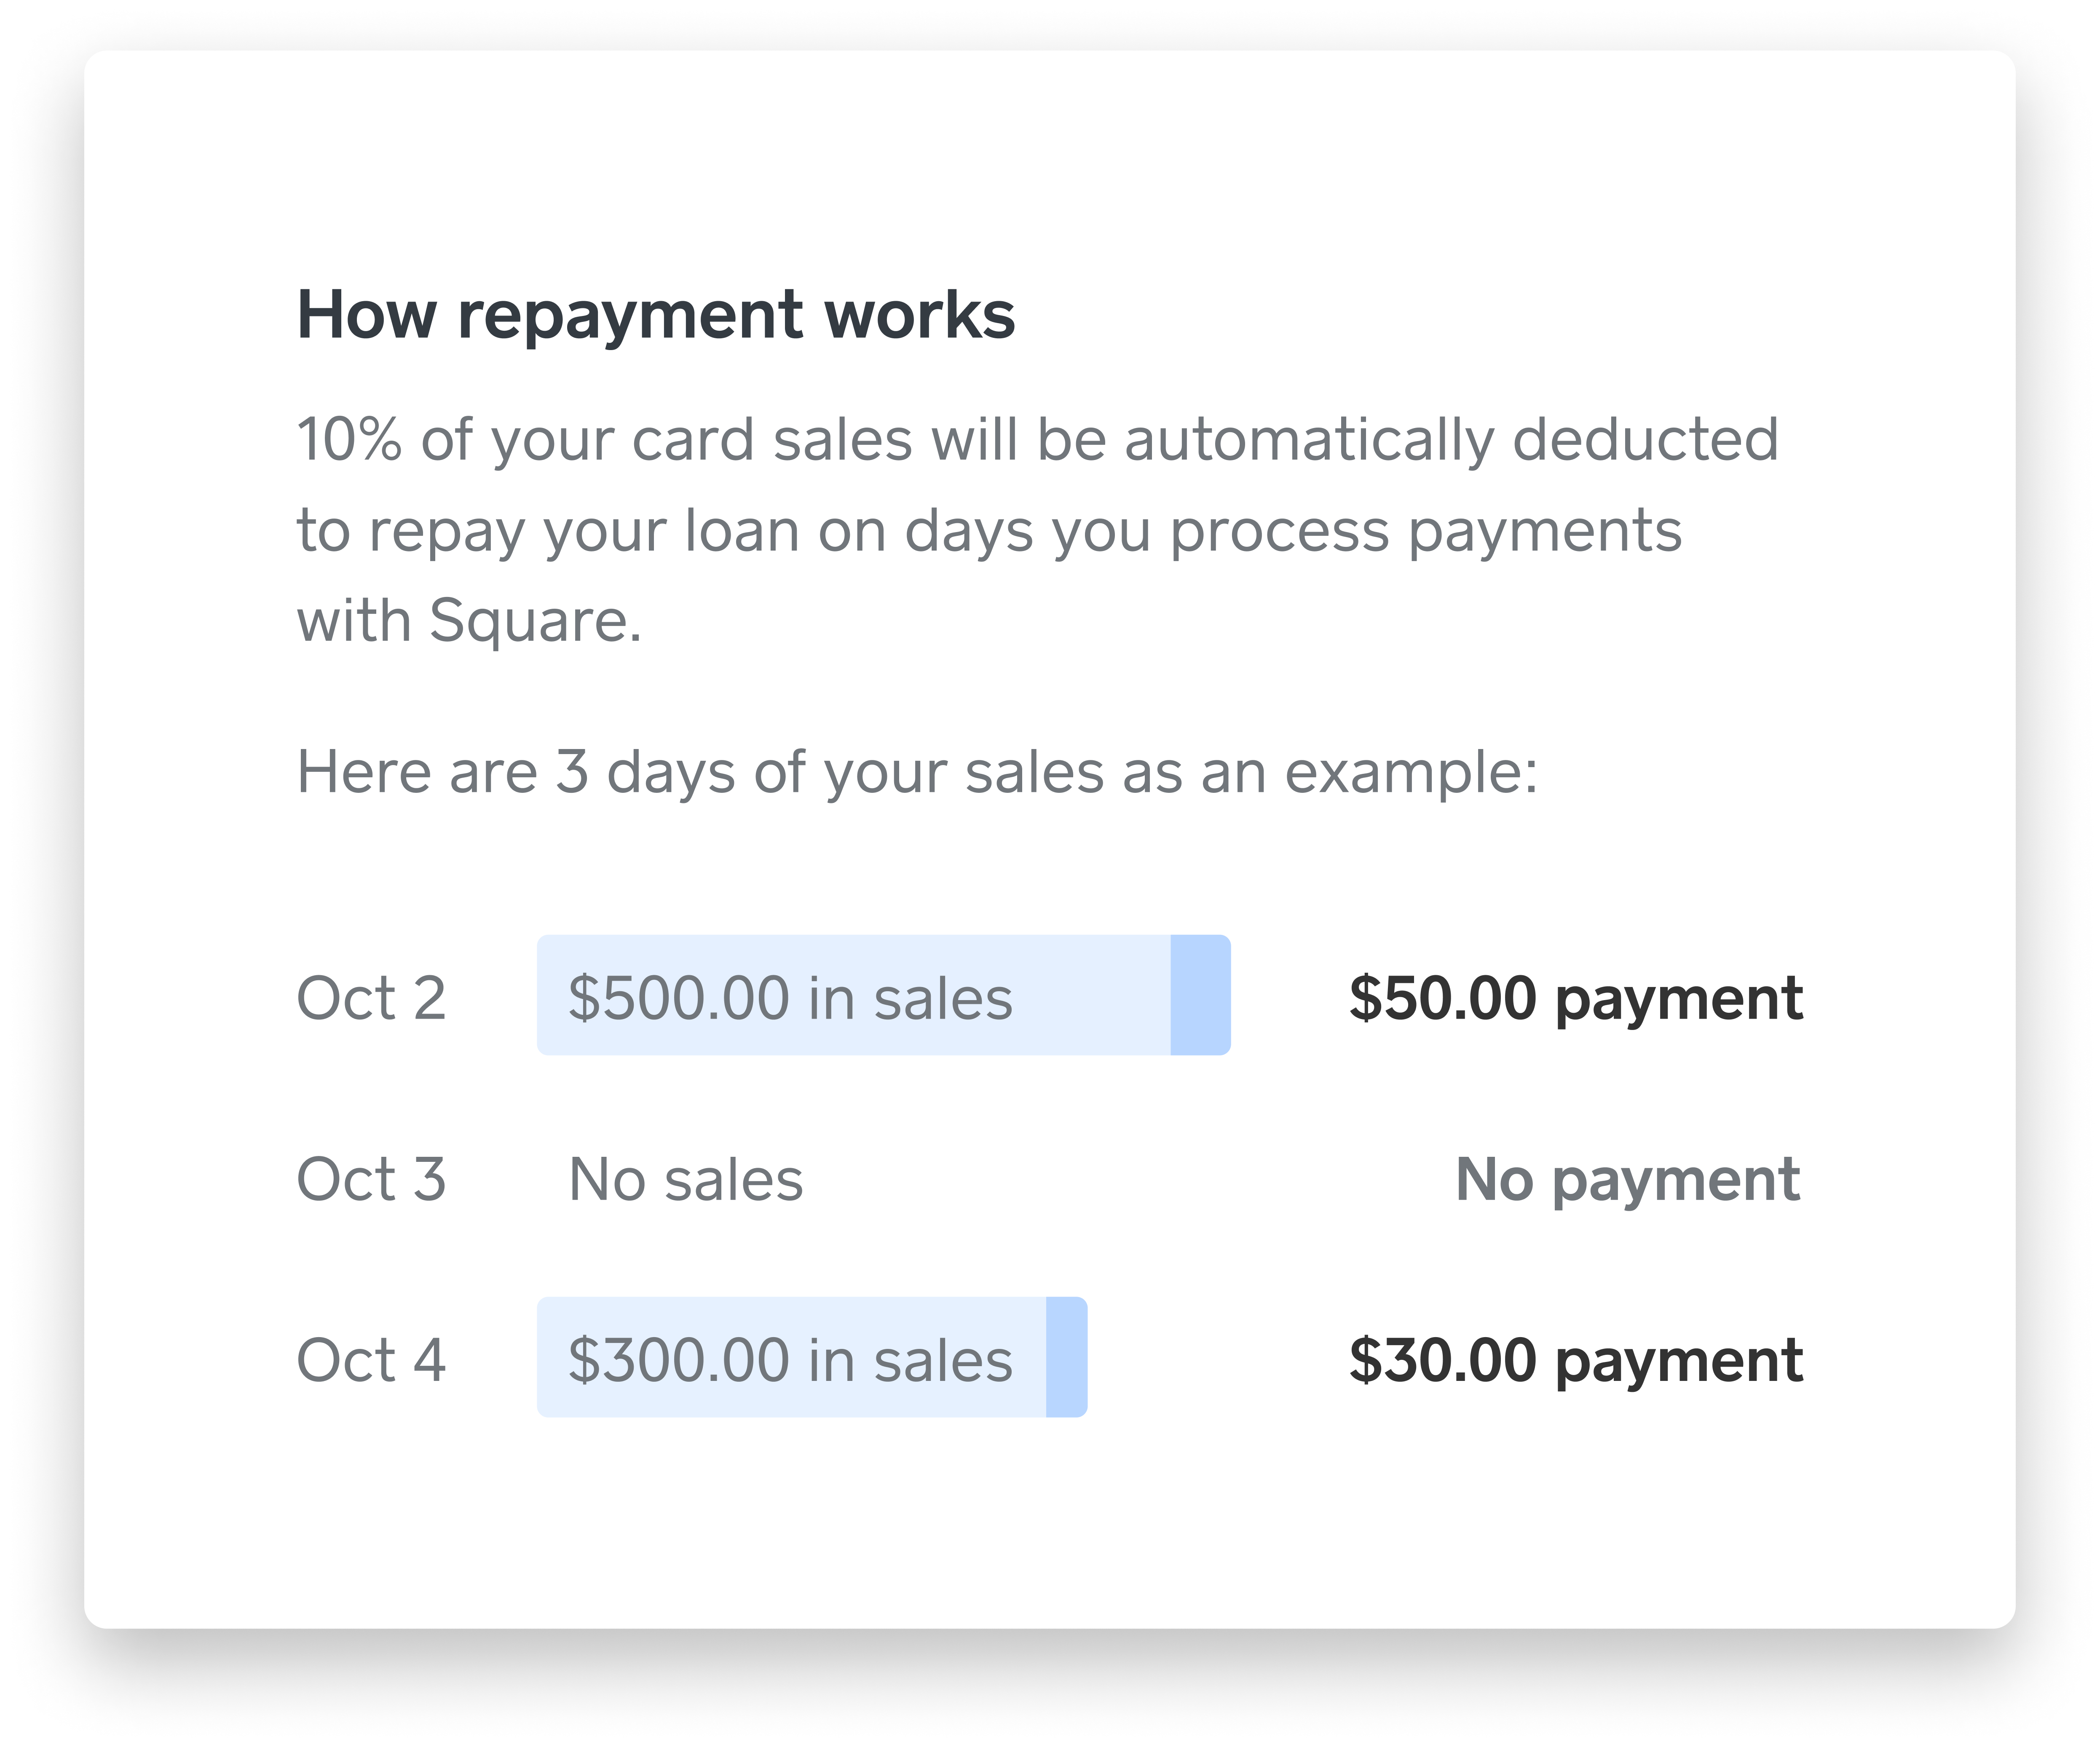 Repayment Overview